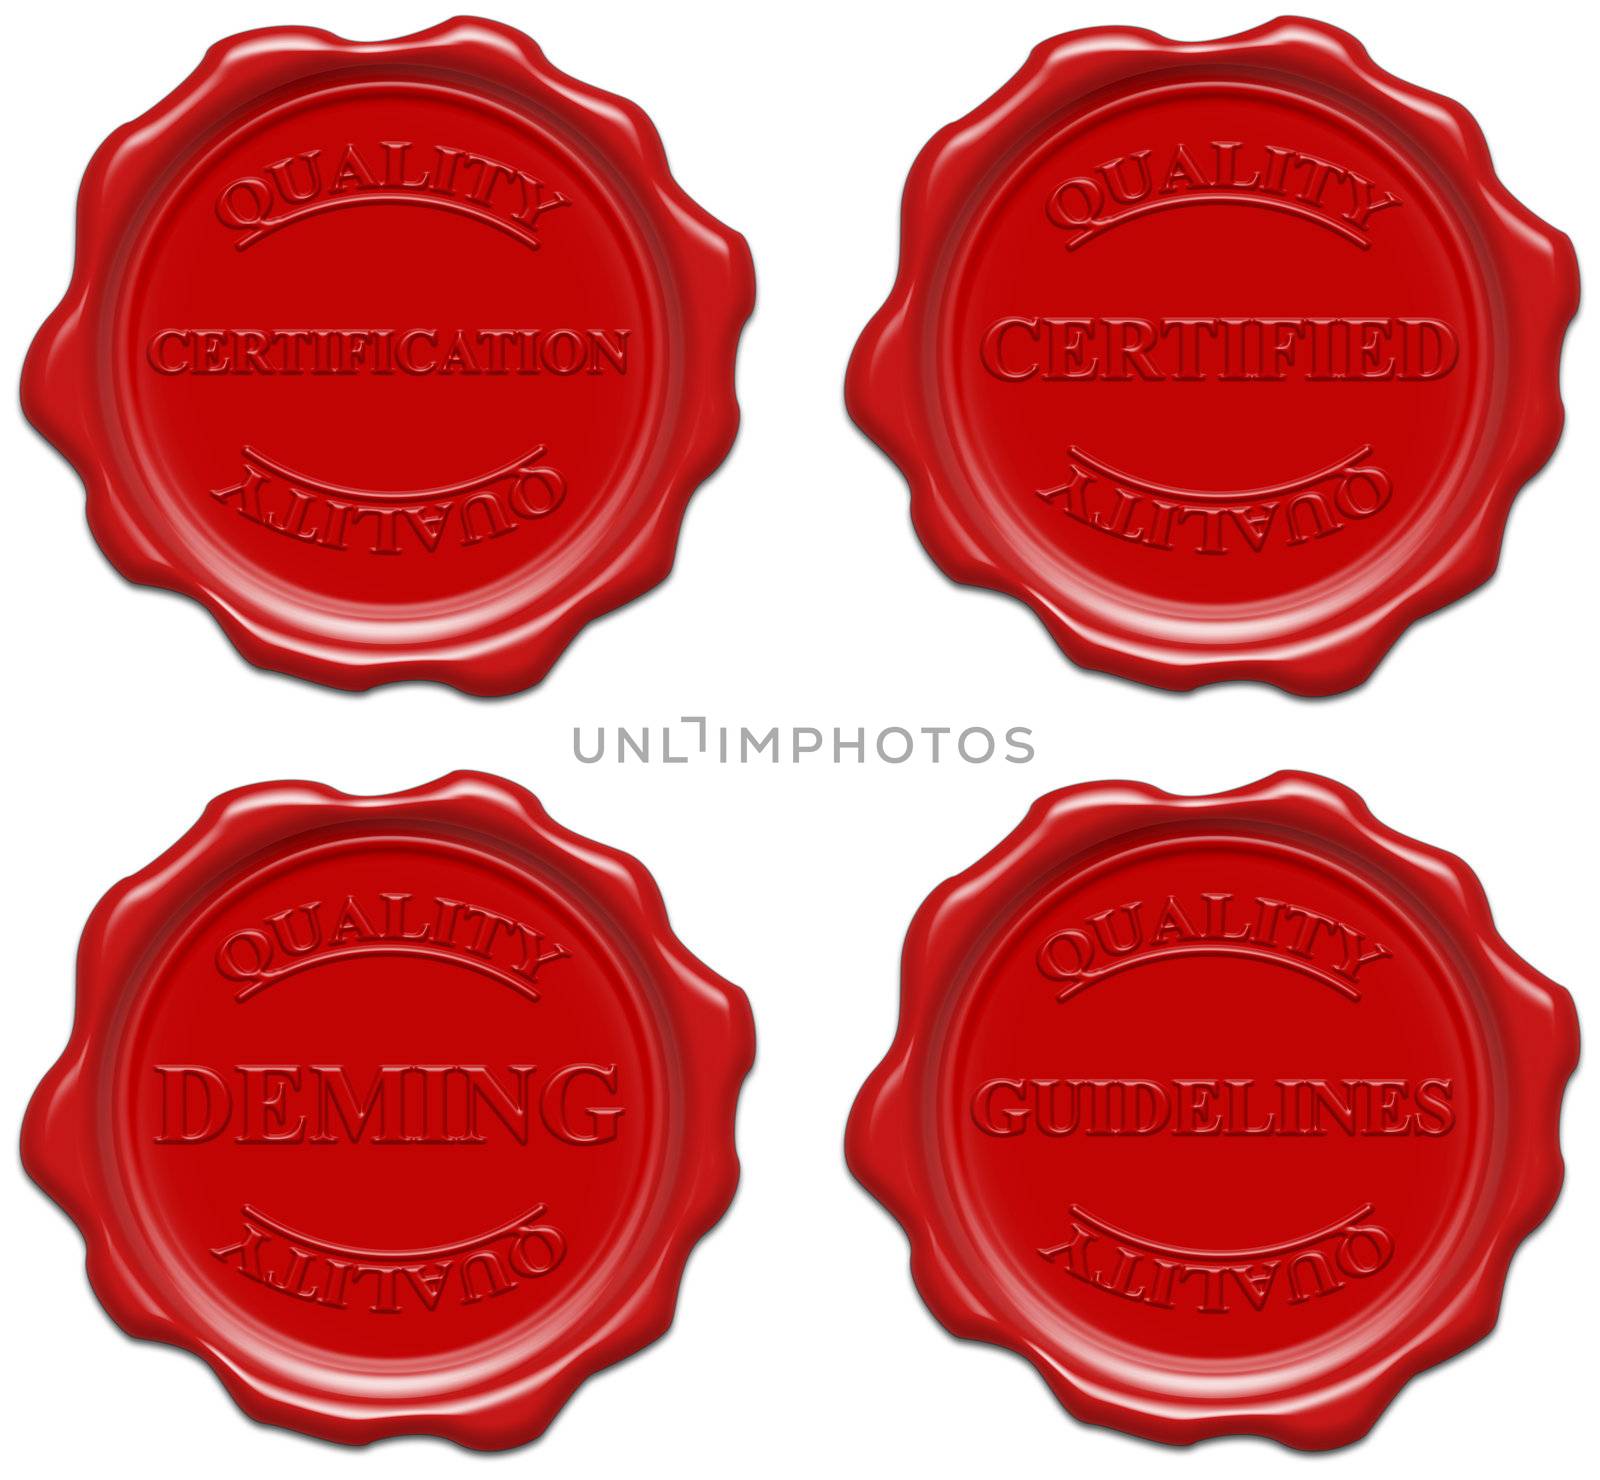 High resolution realistic red wax seal with text : quality, certification, certified, deming, guidelines